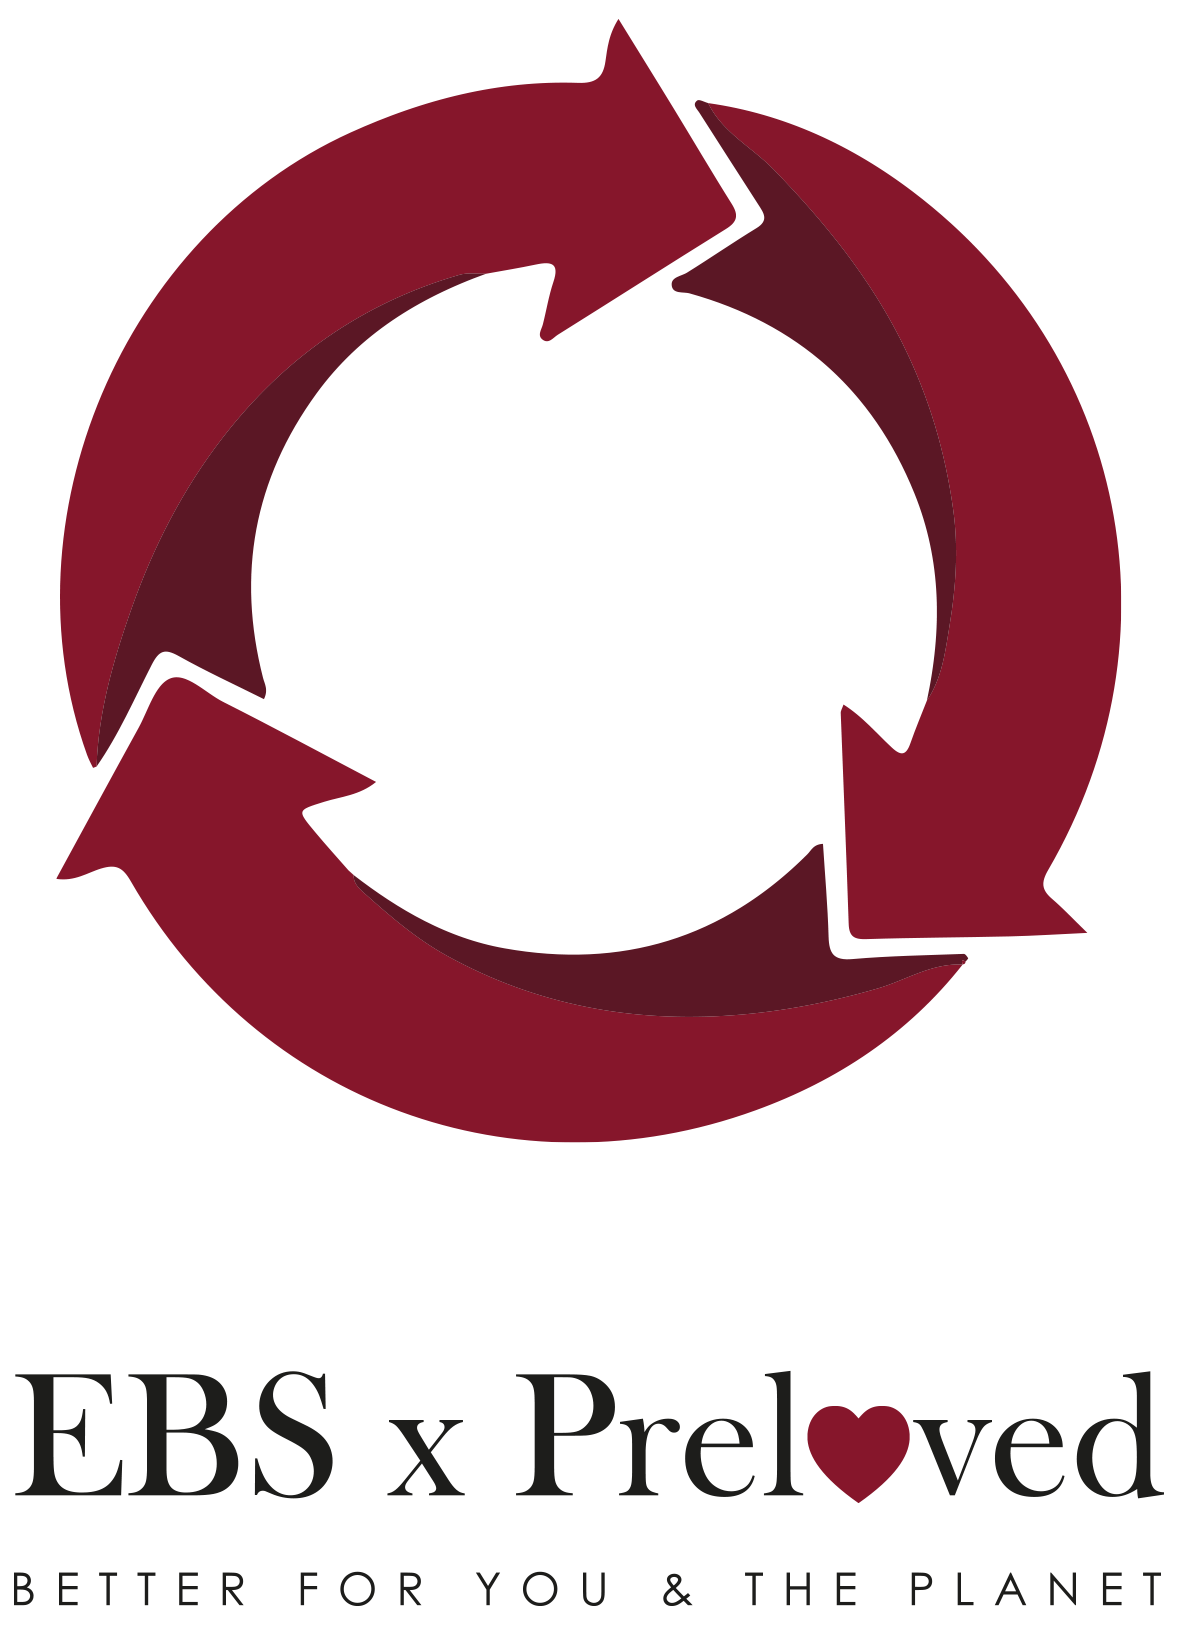 The logo for EBS pre-loved uniform. It is a red circular recycling sign and says EBS x pre-loved with the o replaced with a heart